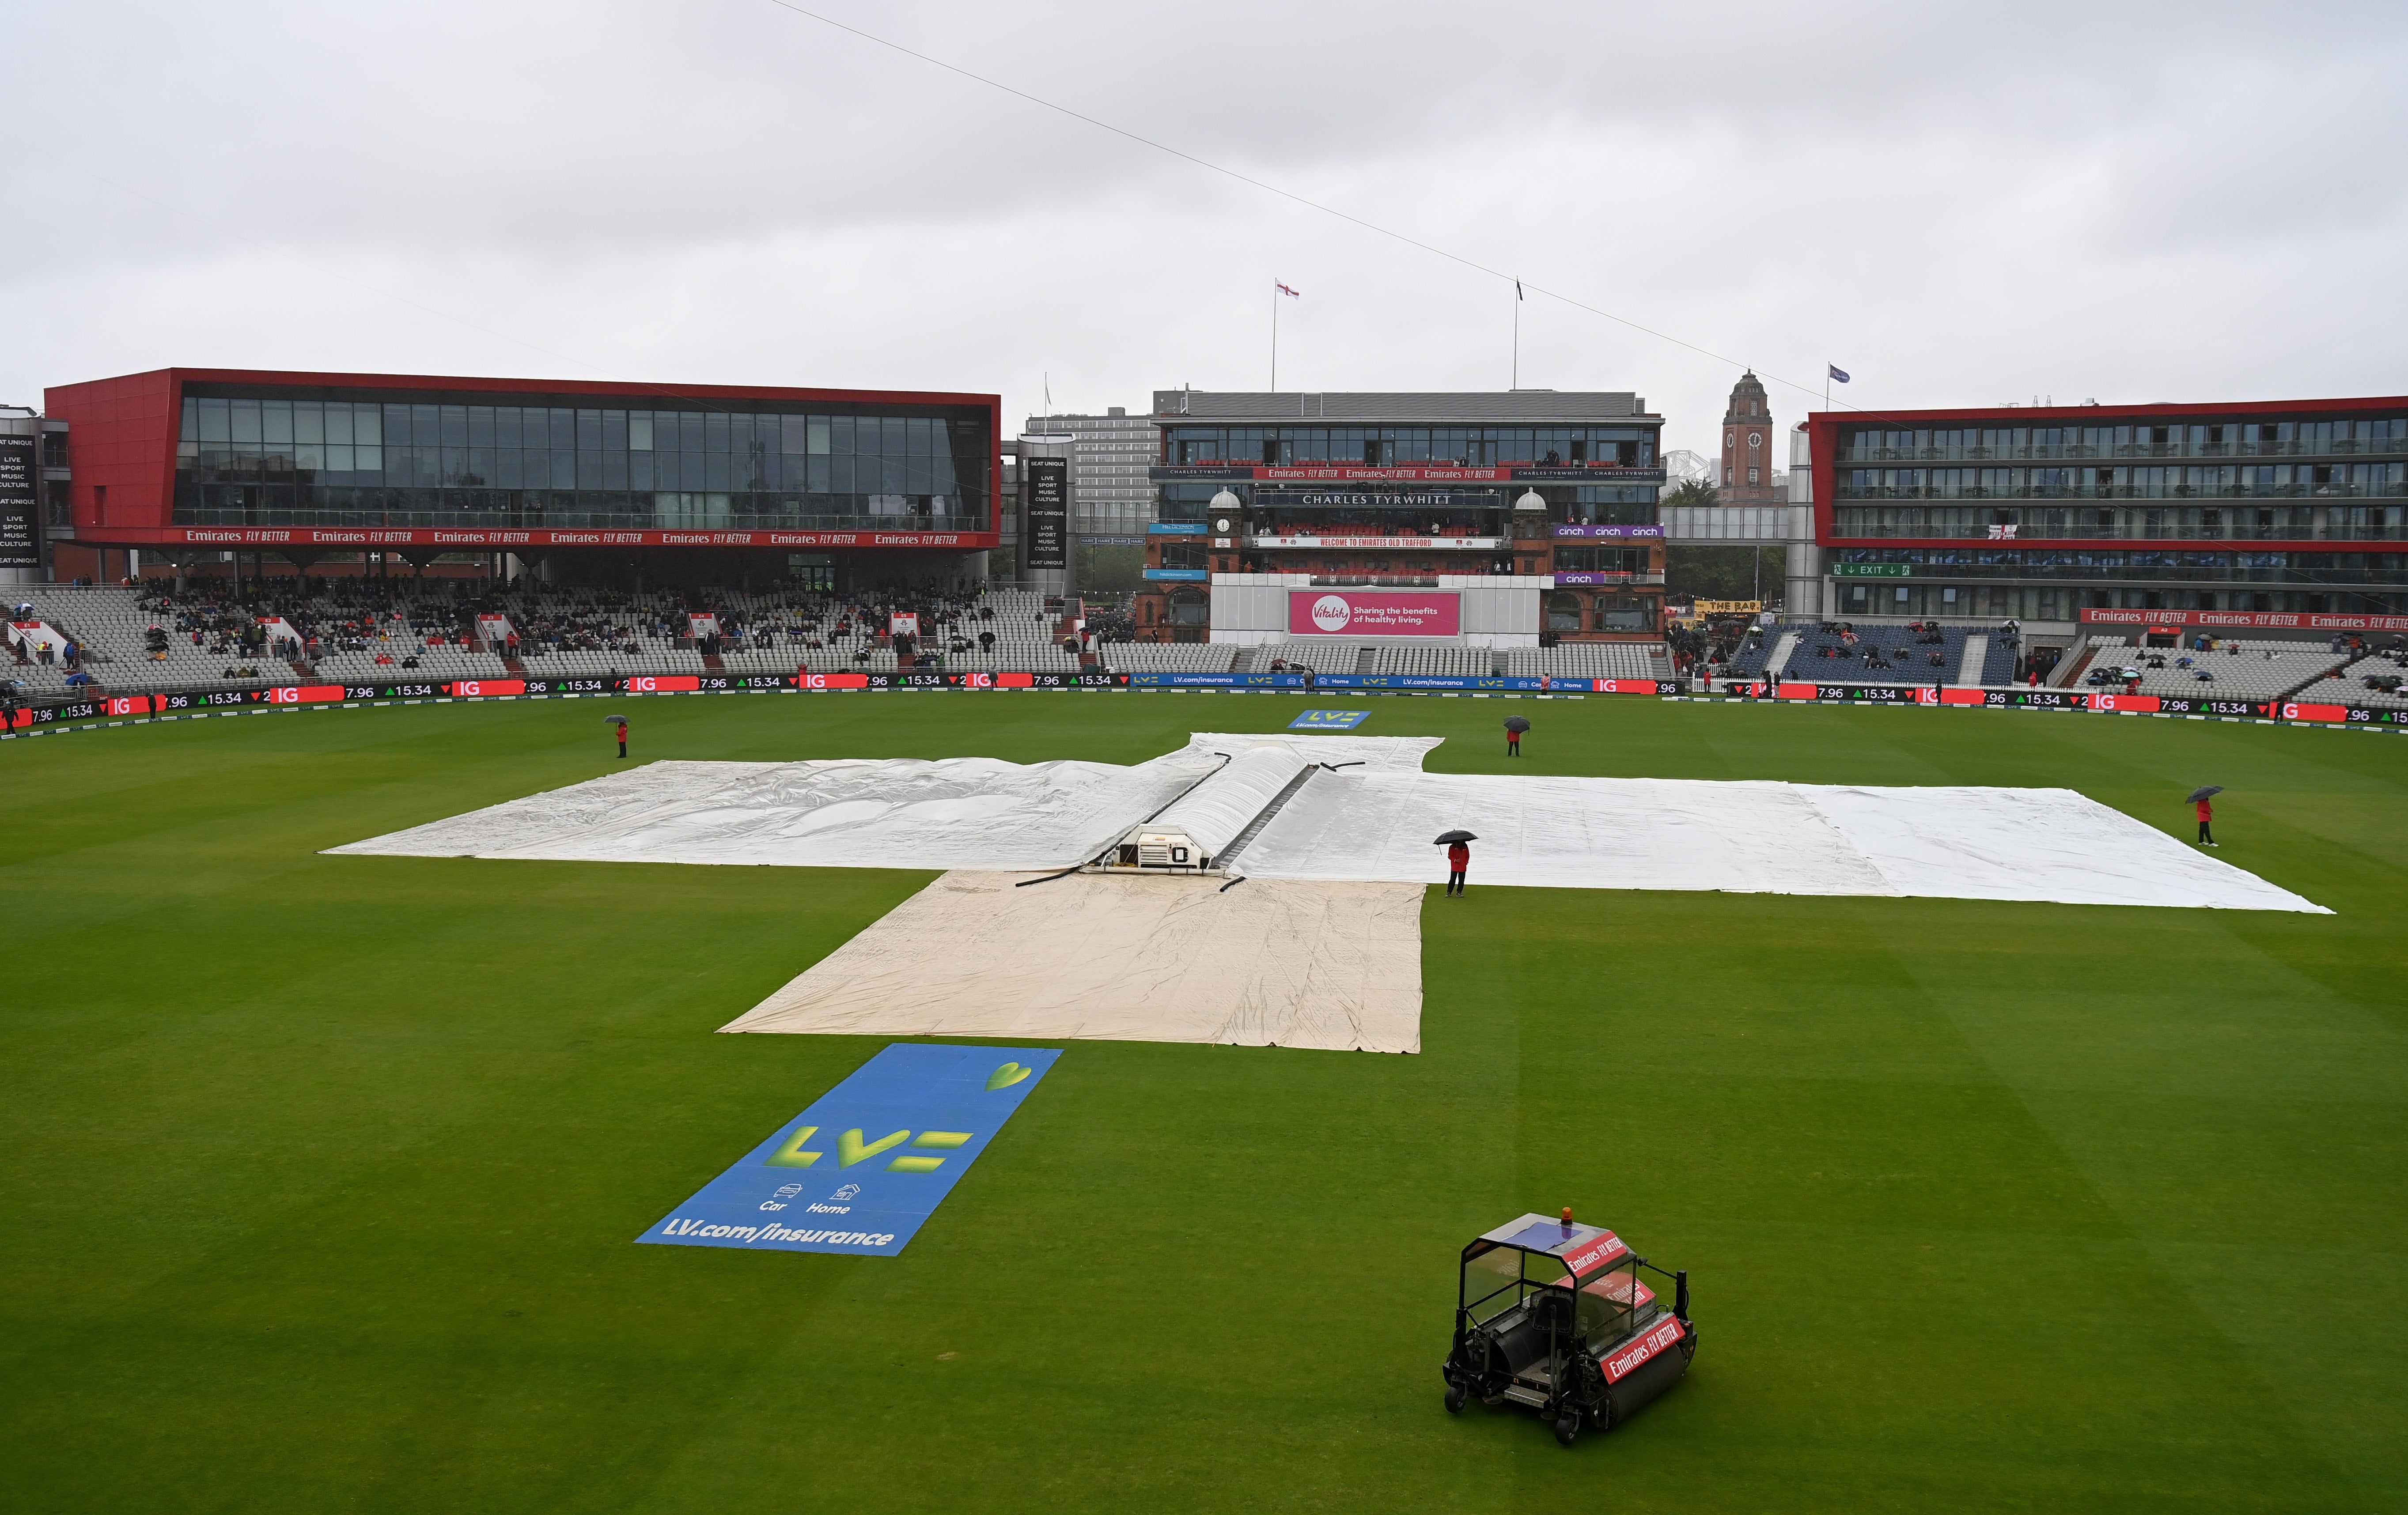 The covers cover the square as rain delays the start of day five of the Ashes